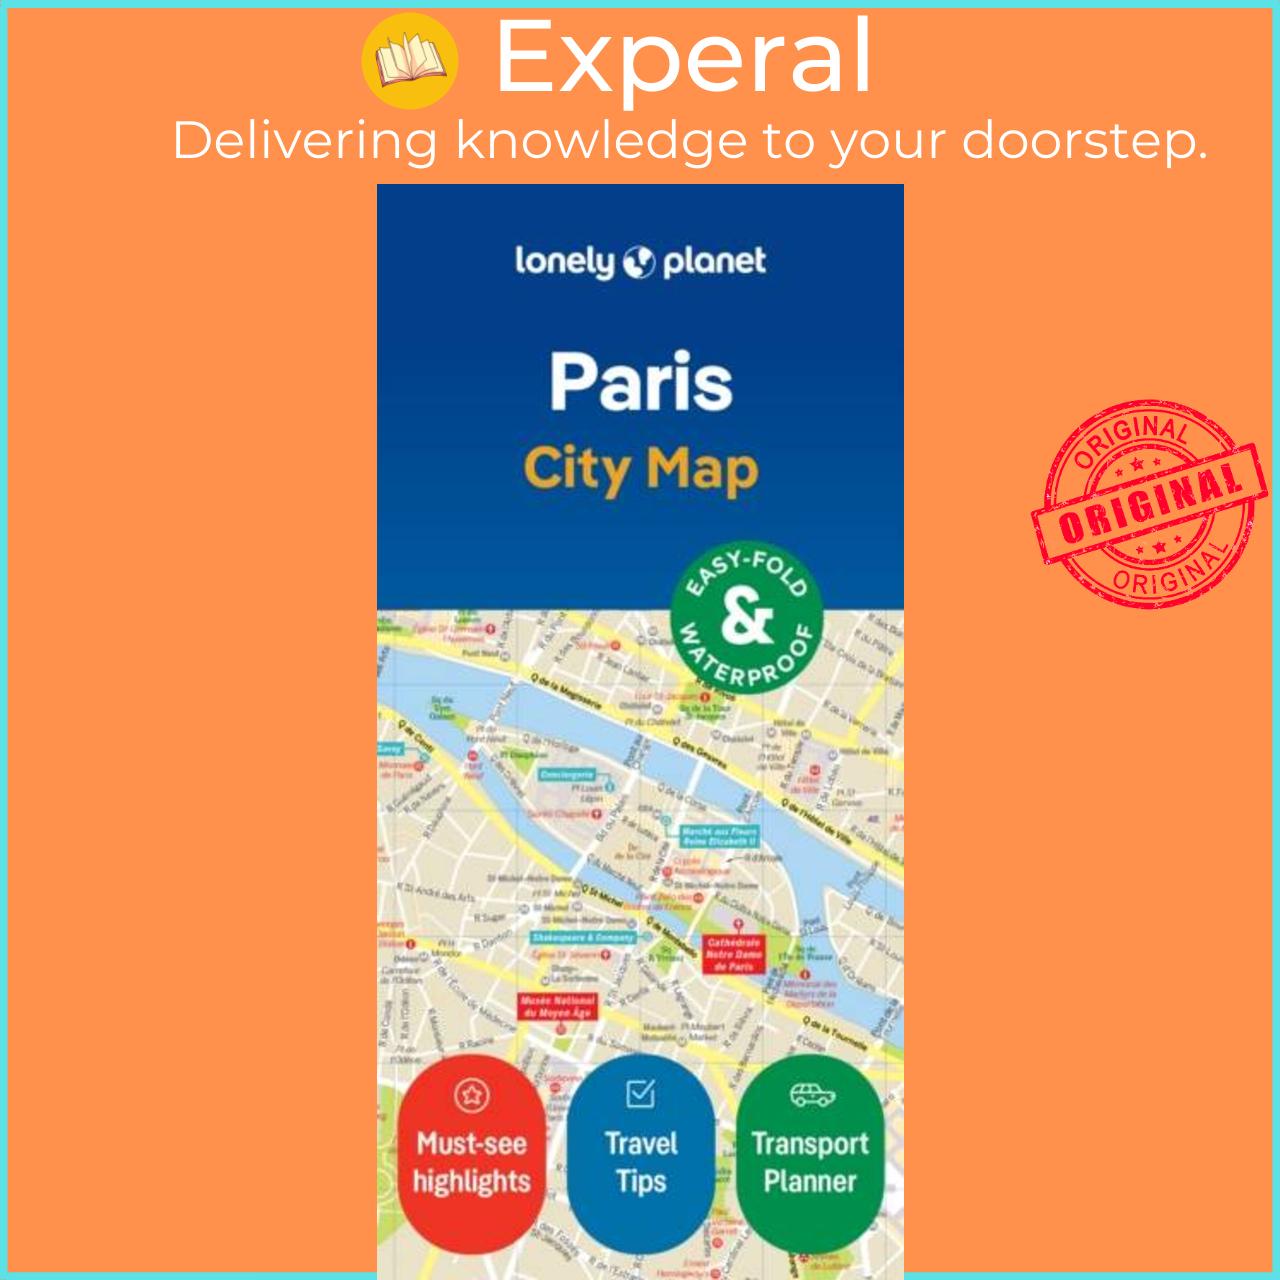 Sách - Lonely Planet Paris City Map by Lonely Planet (UK edition, paperback)